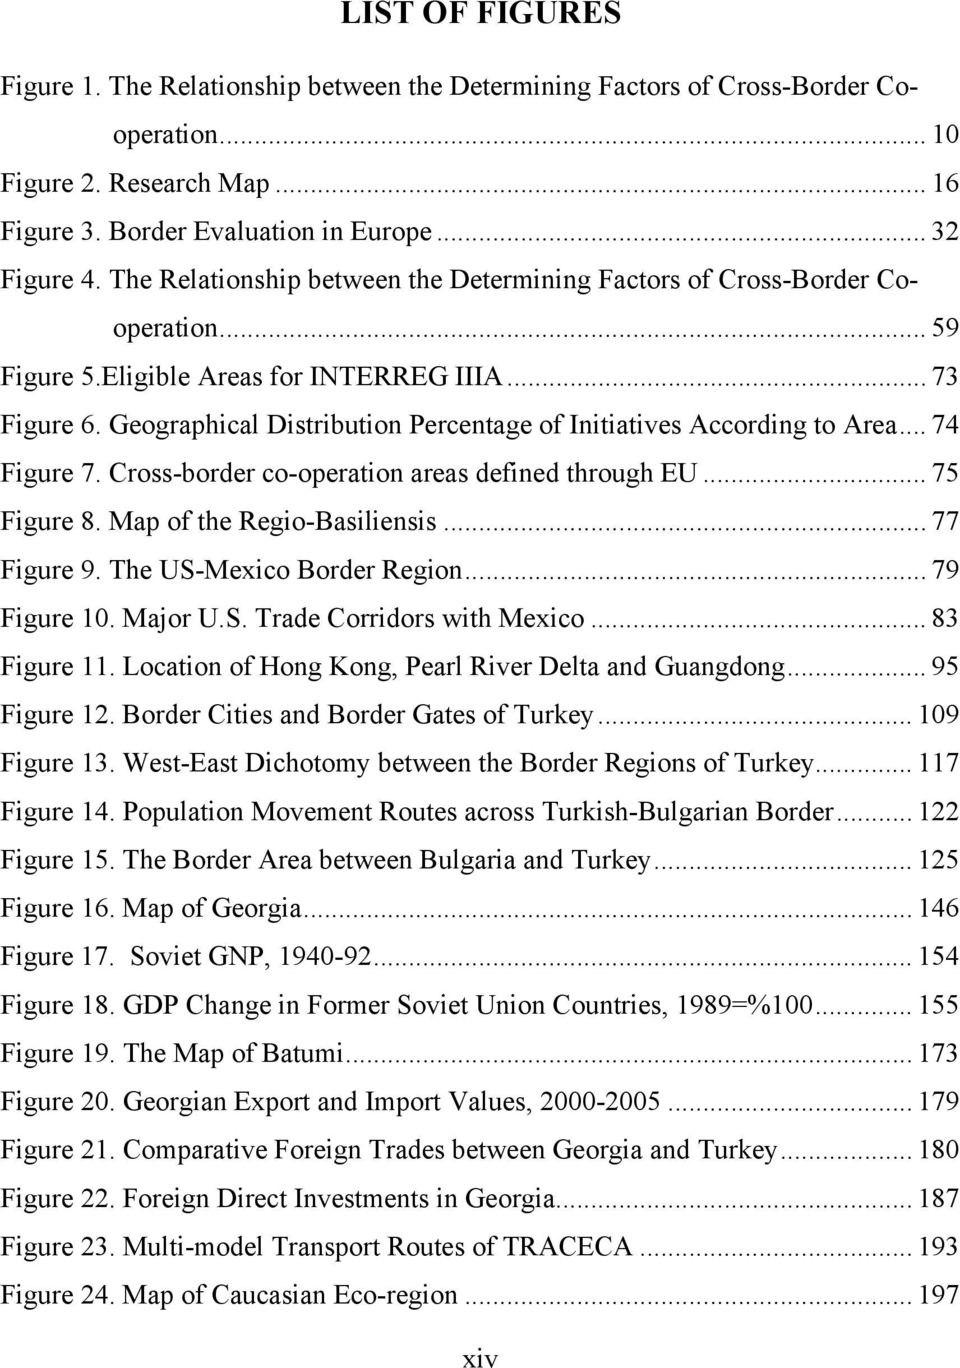 Geographical Distribution Percentage of Initiatives According to Area... 74 Figure 7. Cross-border co-operation areas defined through EU... 75 Figure 8. Map of the Regio-Basiliensis... 77 Figure 9.